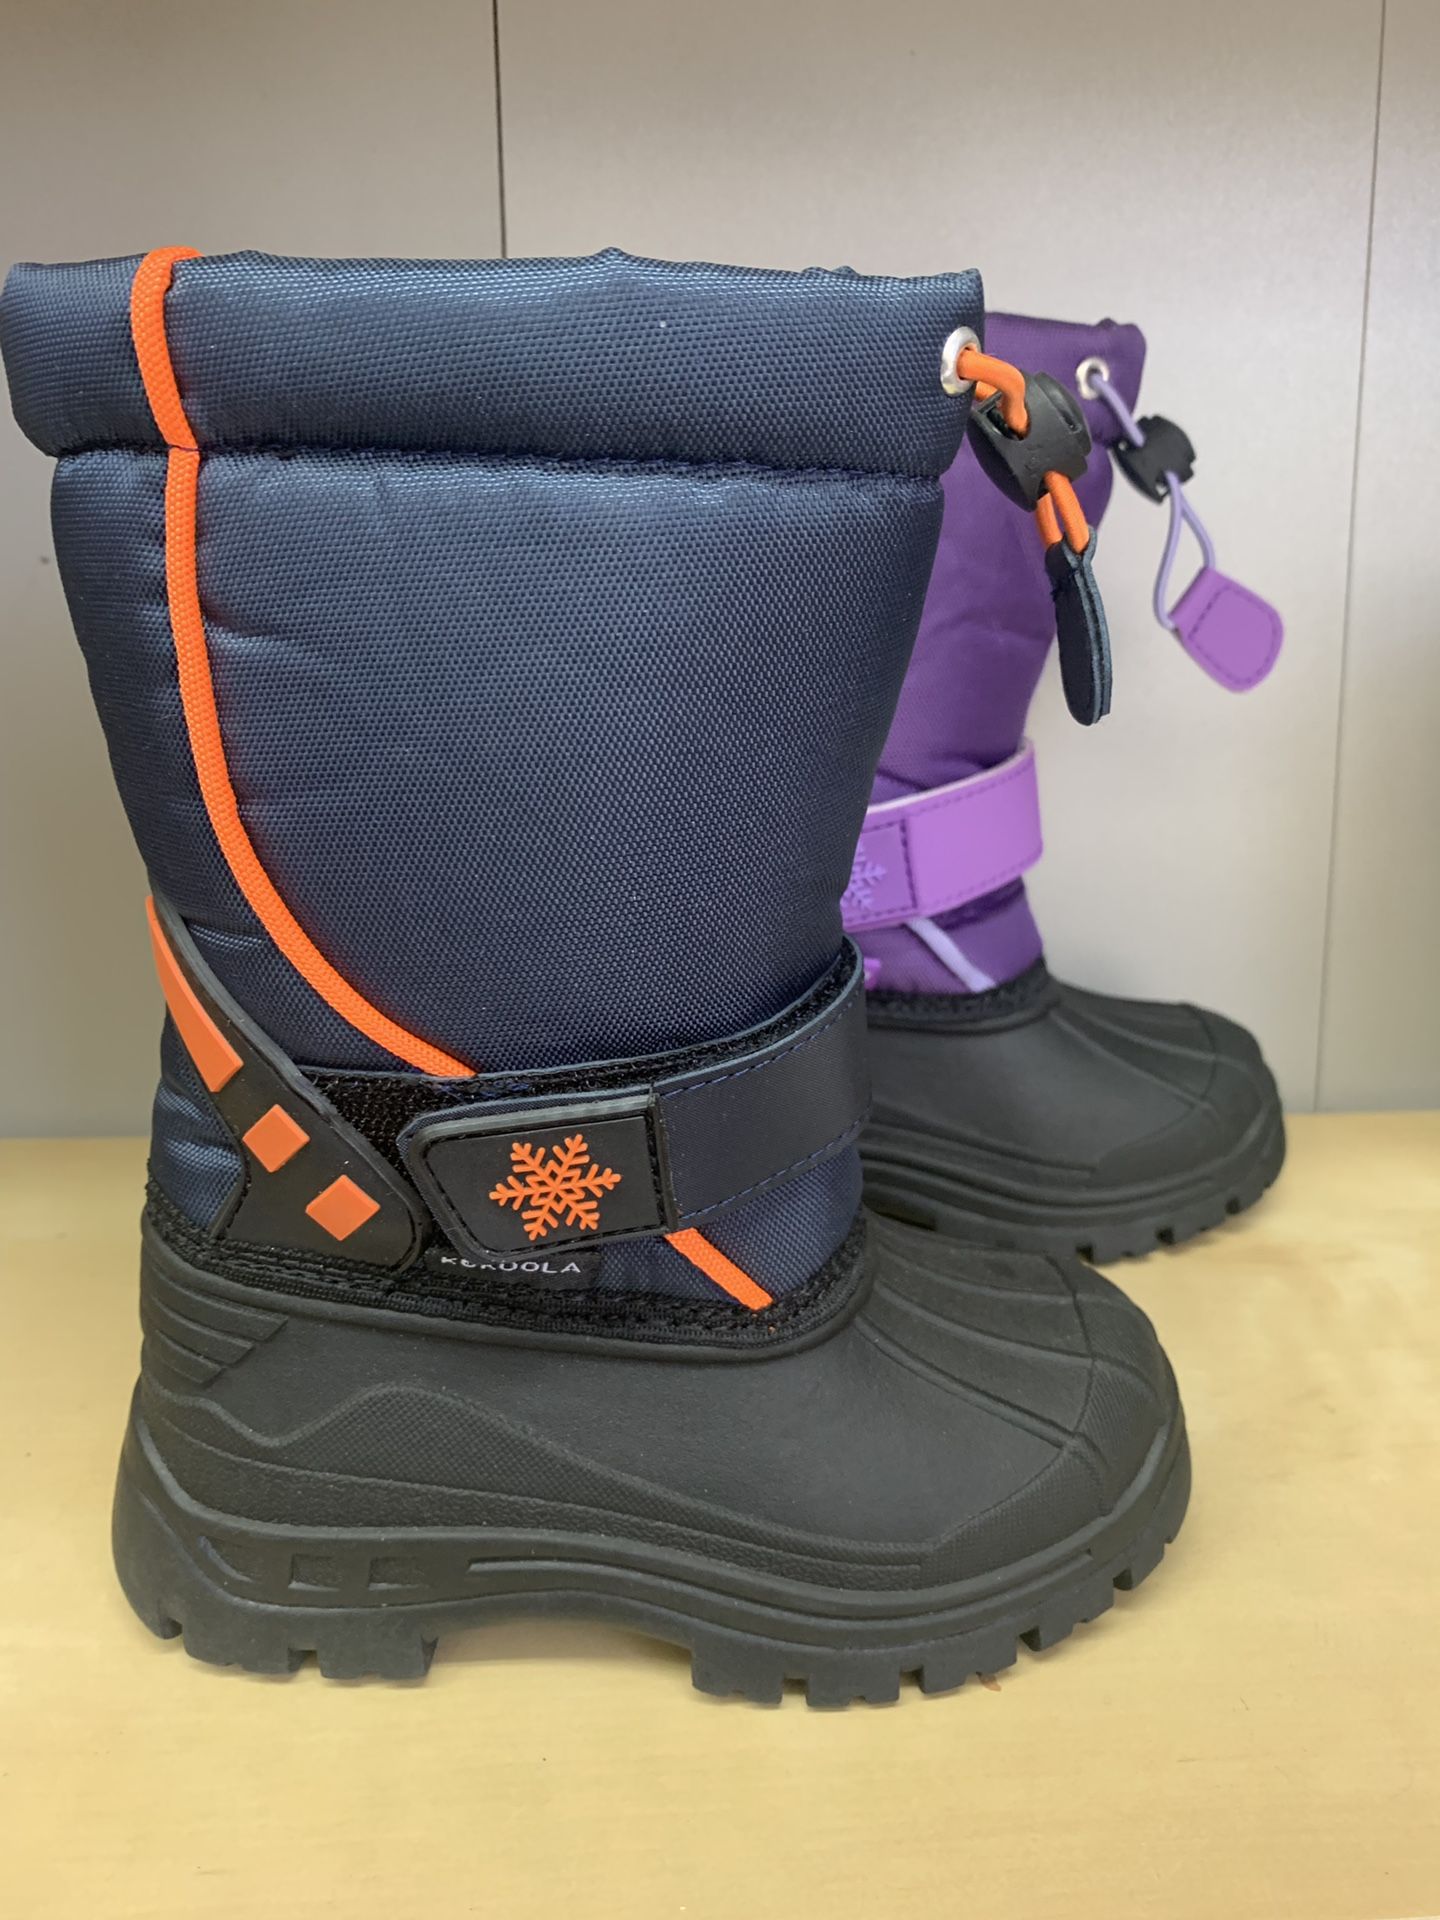 Snow boots for kids sizes 9, 10, 11 ,12, 13, 1, 2, 3 ,4